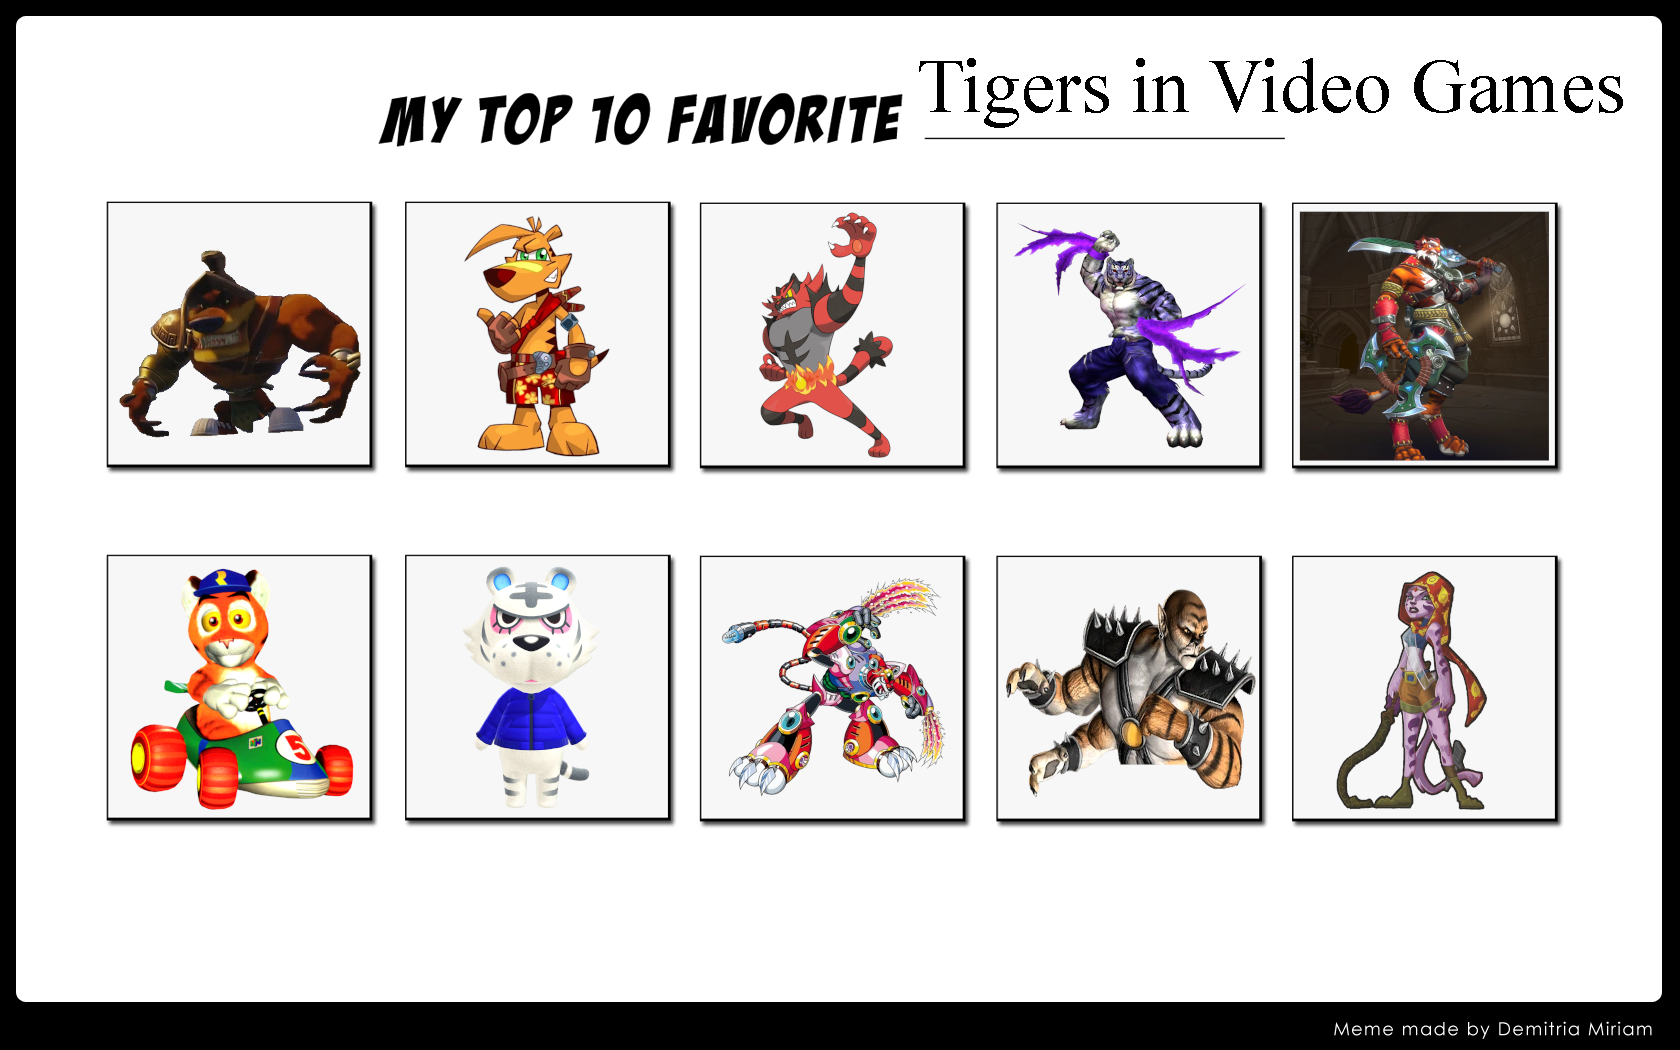 Top 10 Tigers in Video Games by ForestTheGamer on DeviantArt